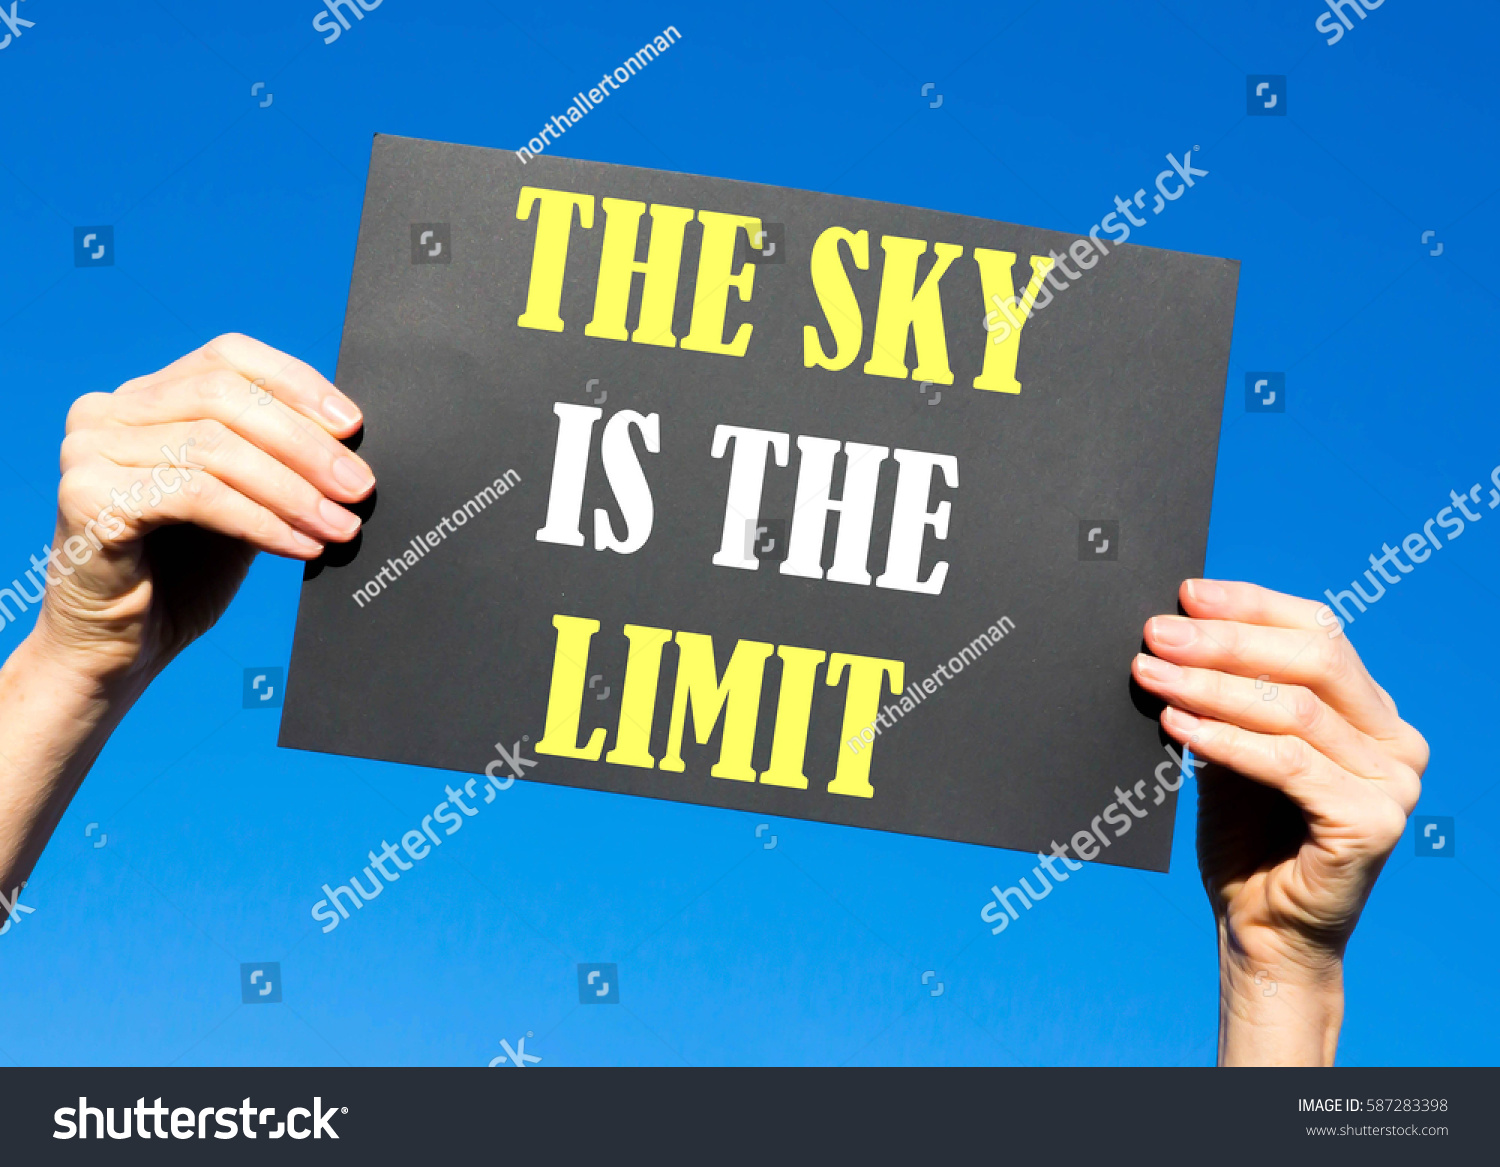 Black card placard with the concept of The Sky Is The Limit against a clear blue sky background #587283398